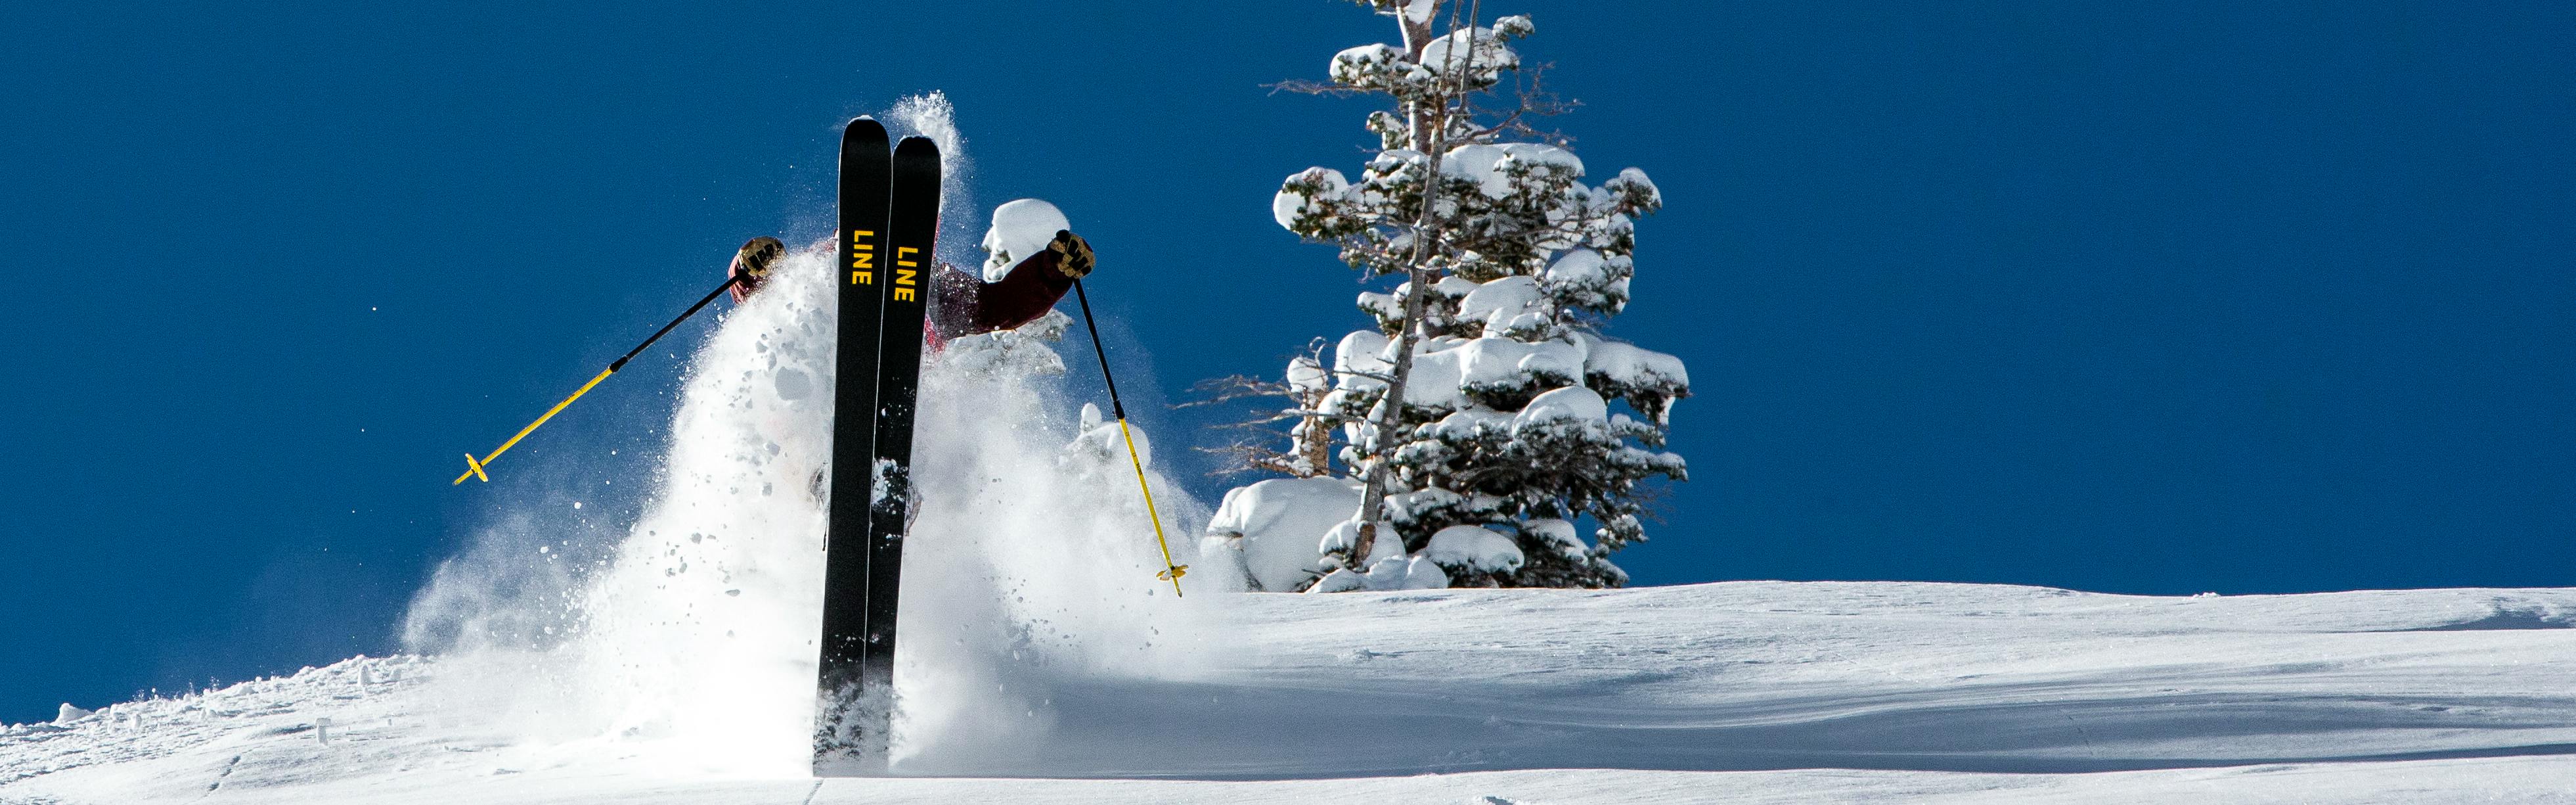 A skier doing a trick on Line skis. 